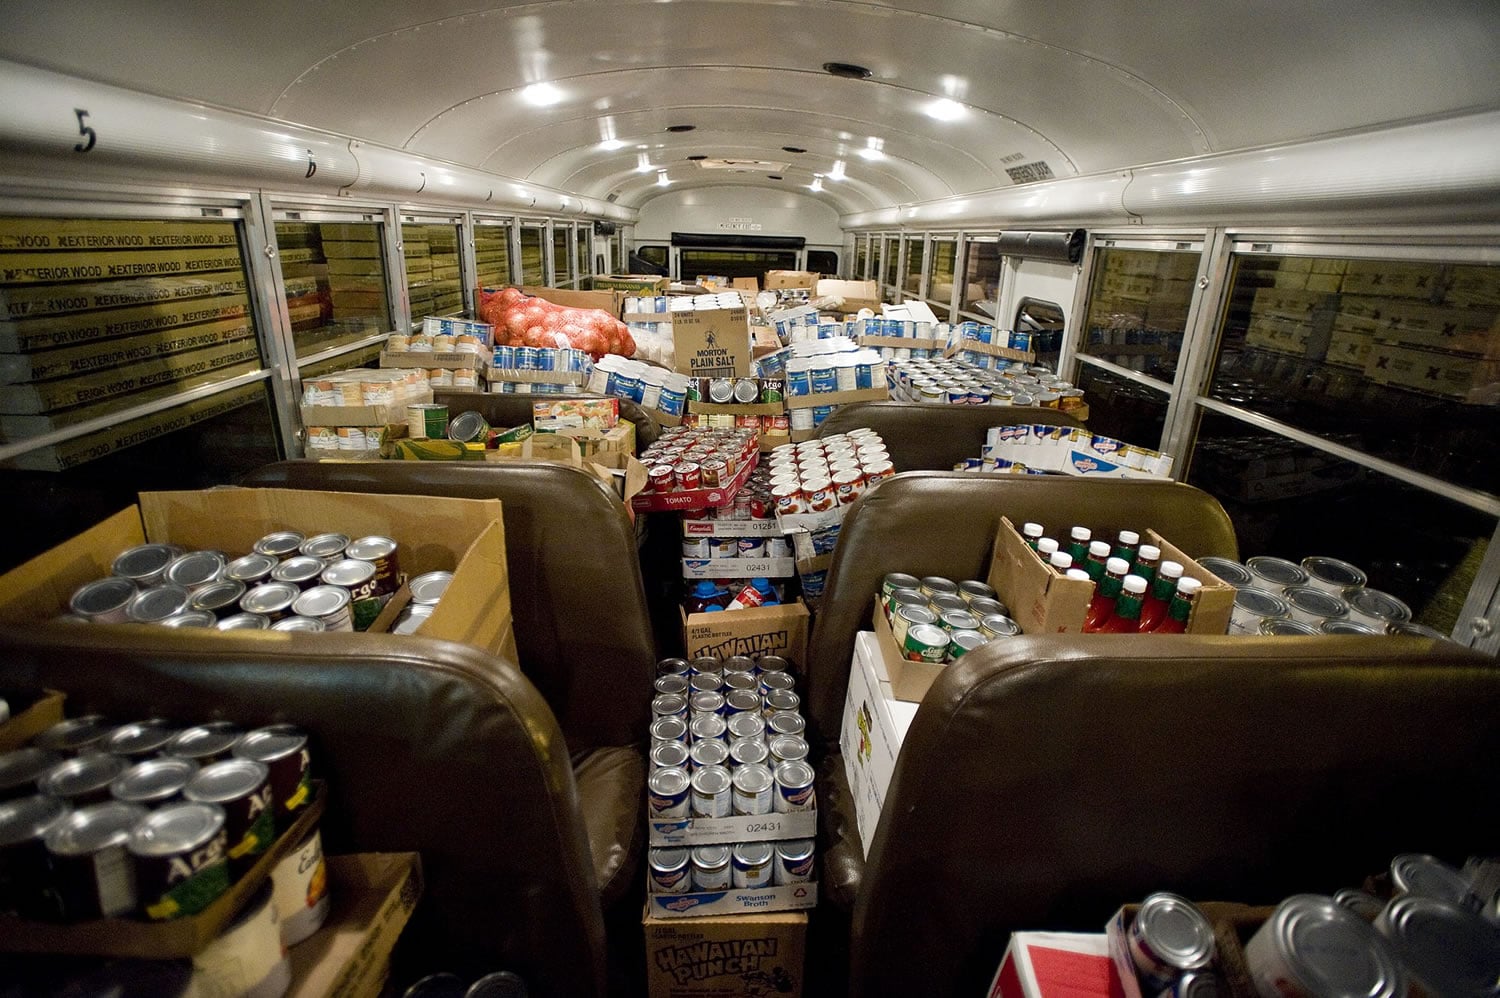 A bus from Camas High School filled with food is weighed during the Stuff the Bus food drive ceremony at Exterior Wood in Washougal, Friday, December 10, 2010.